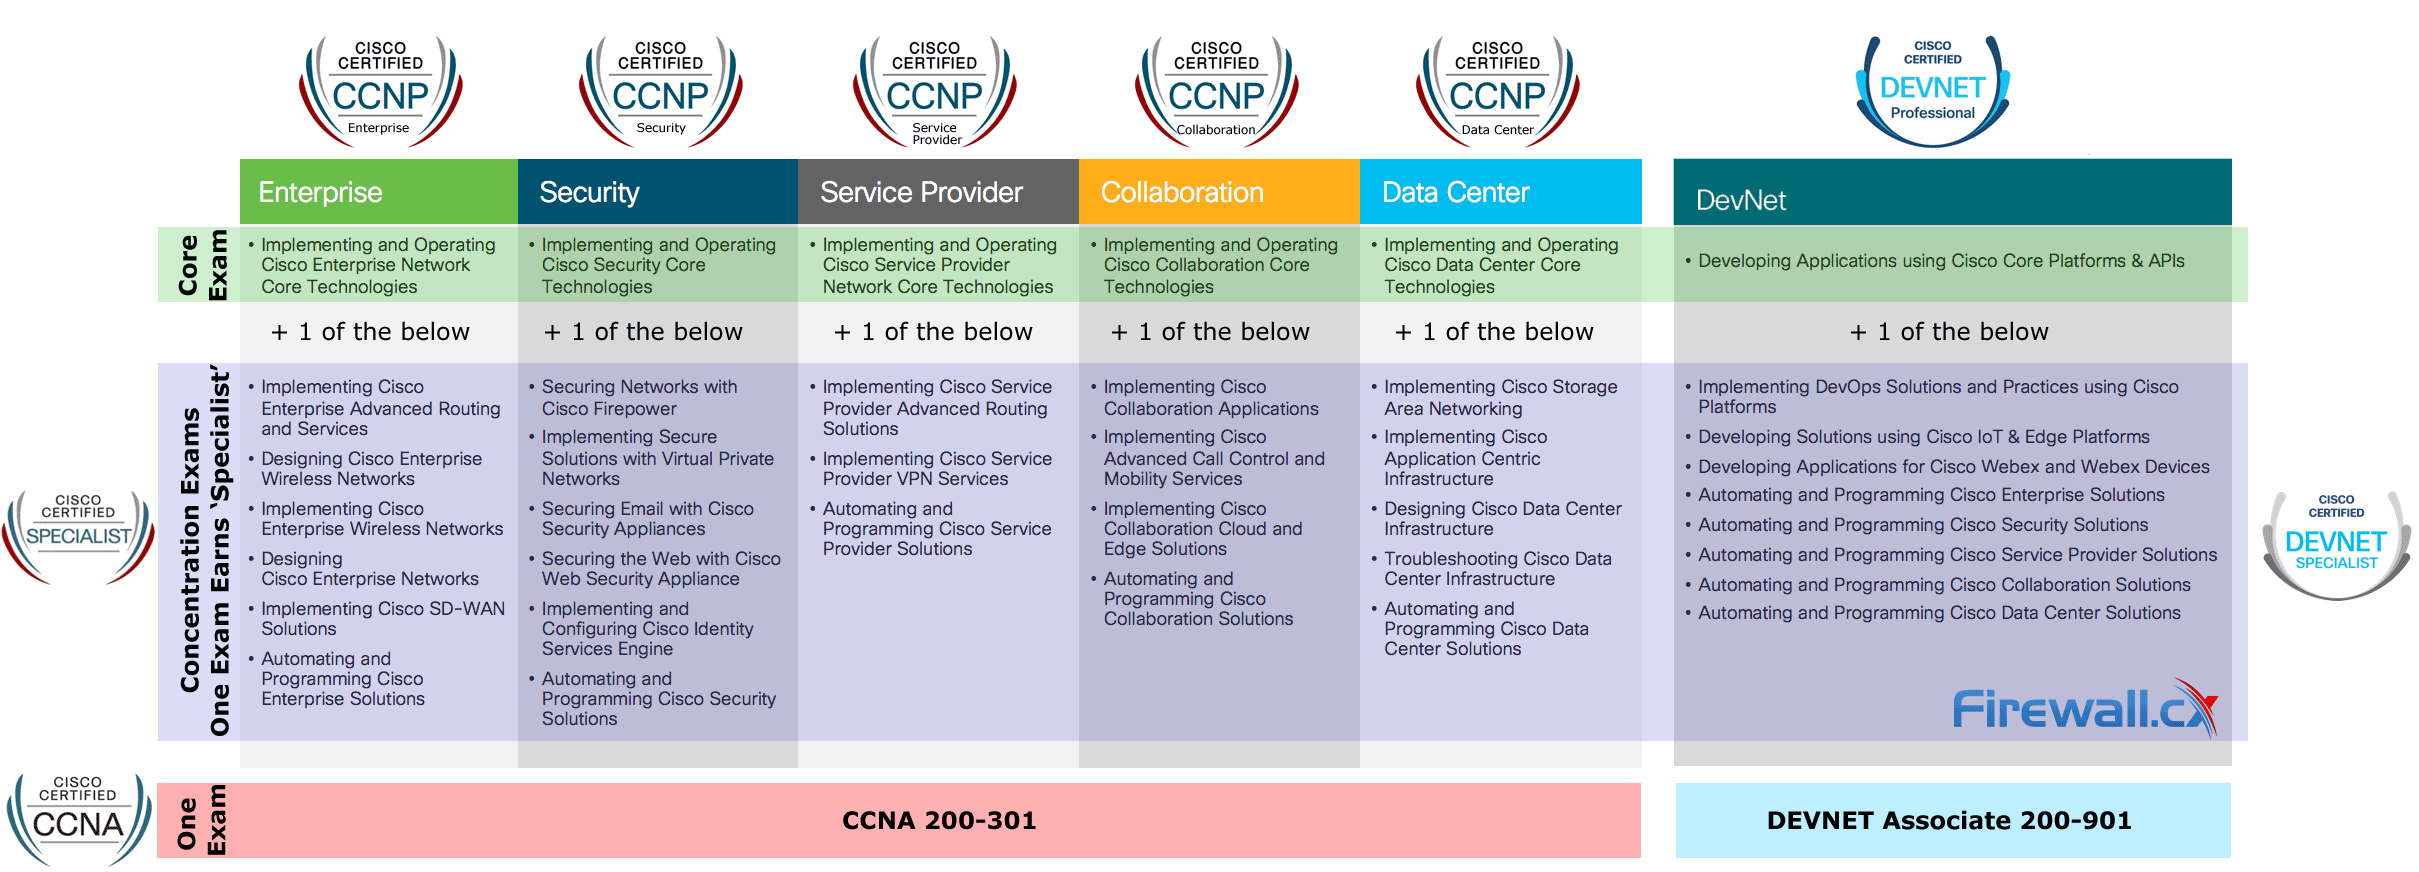 mariposa Observatorio Señal Major Cisco Certification Changes - New Cisco CCNA, CCNP Enterprise,  Specialist, DevNet and more from Feb. 2020